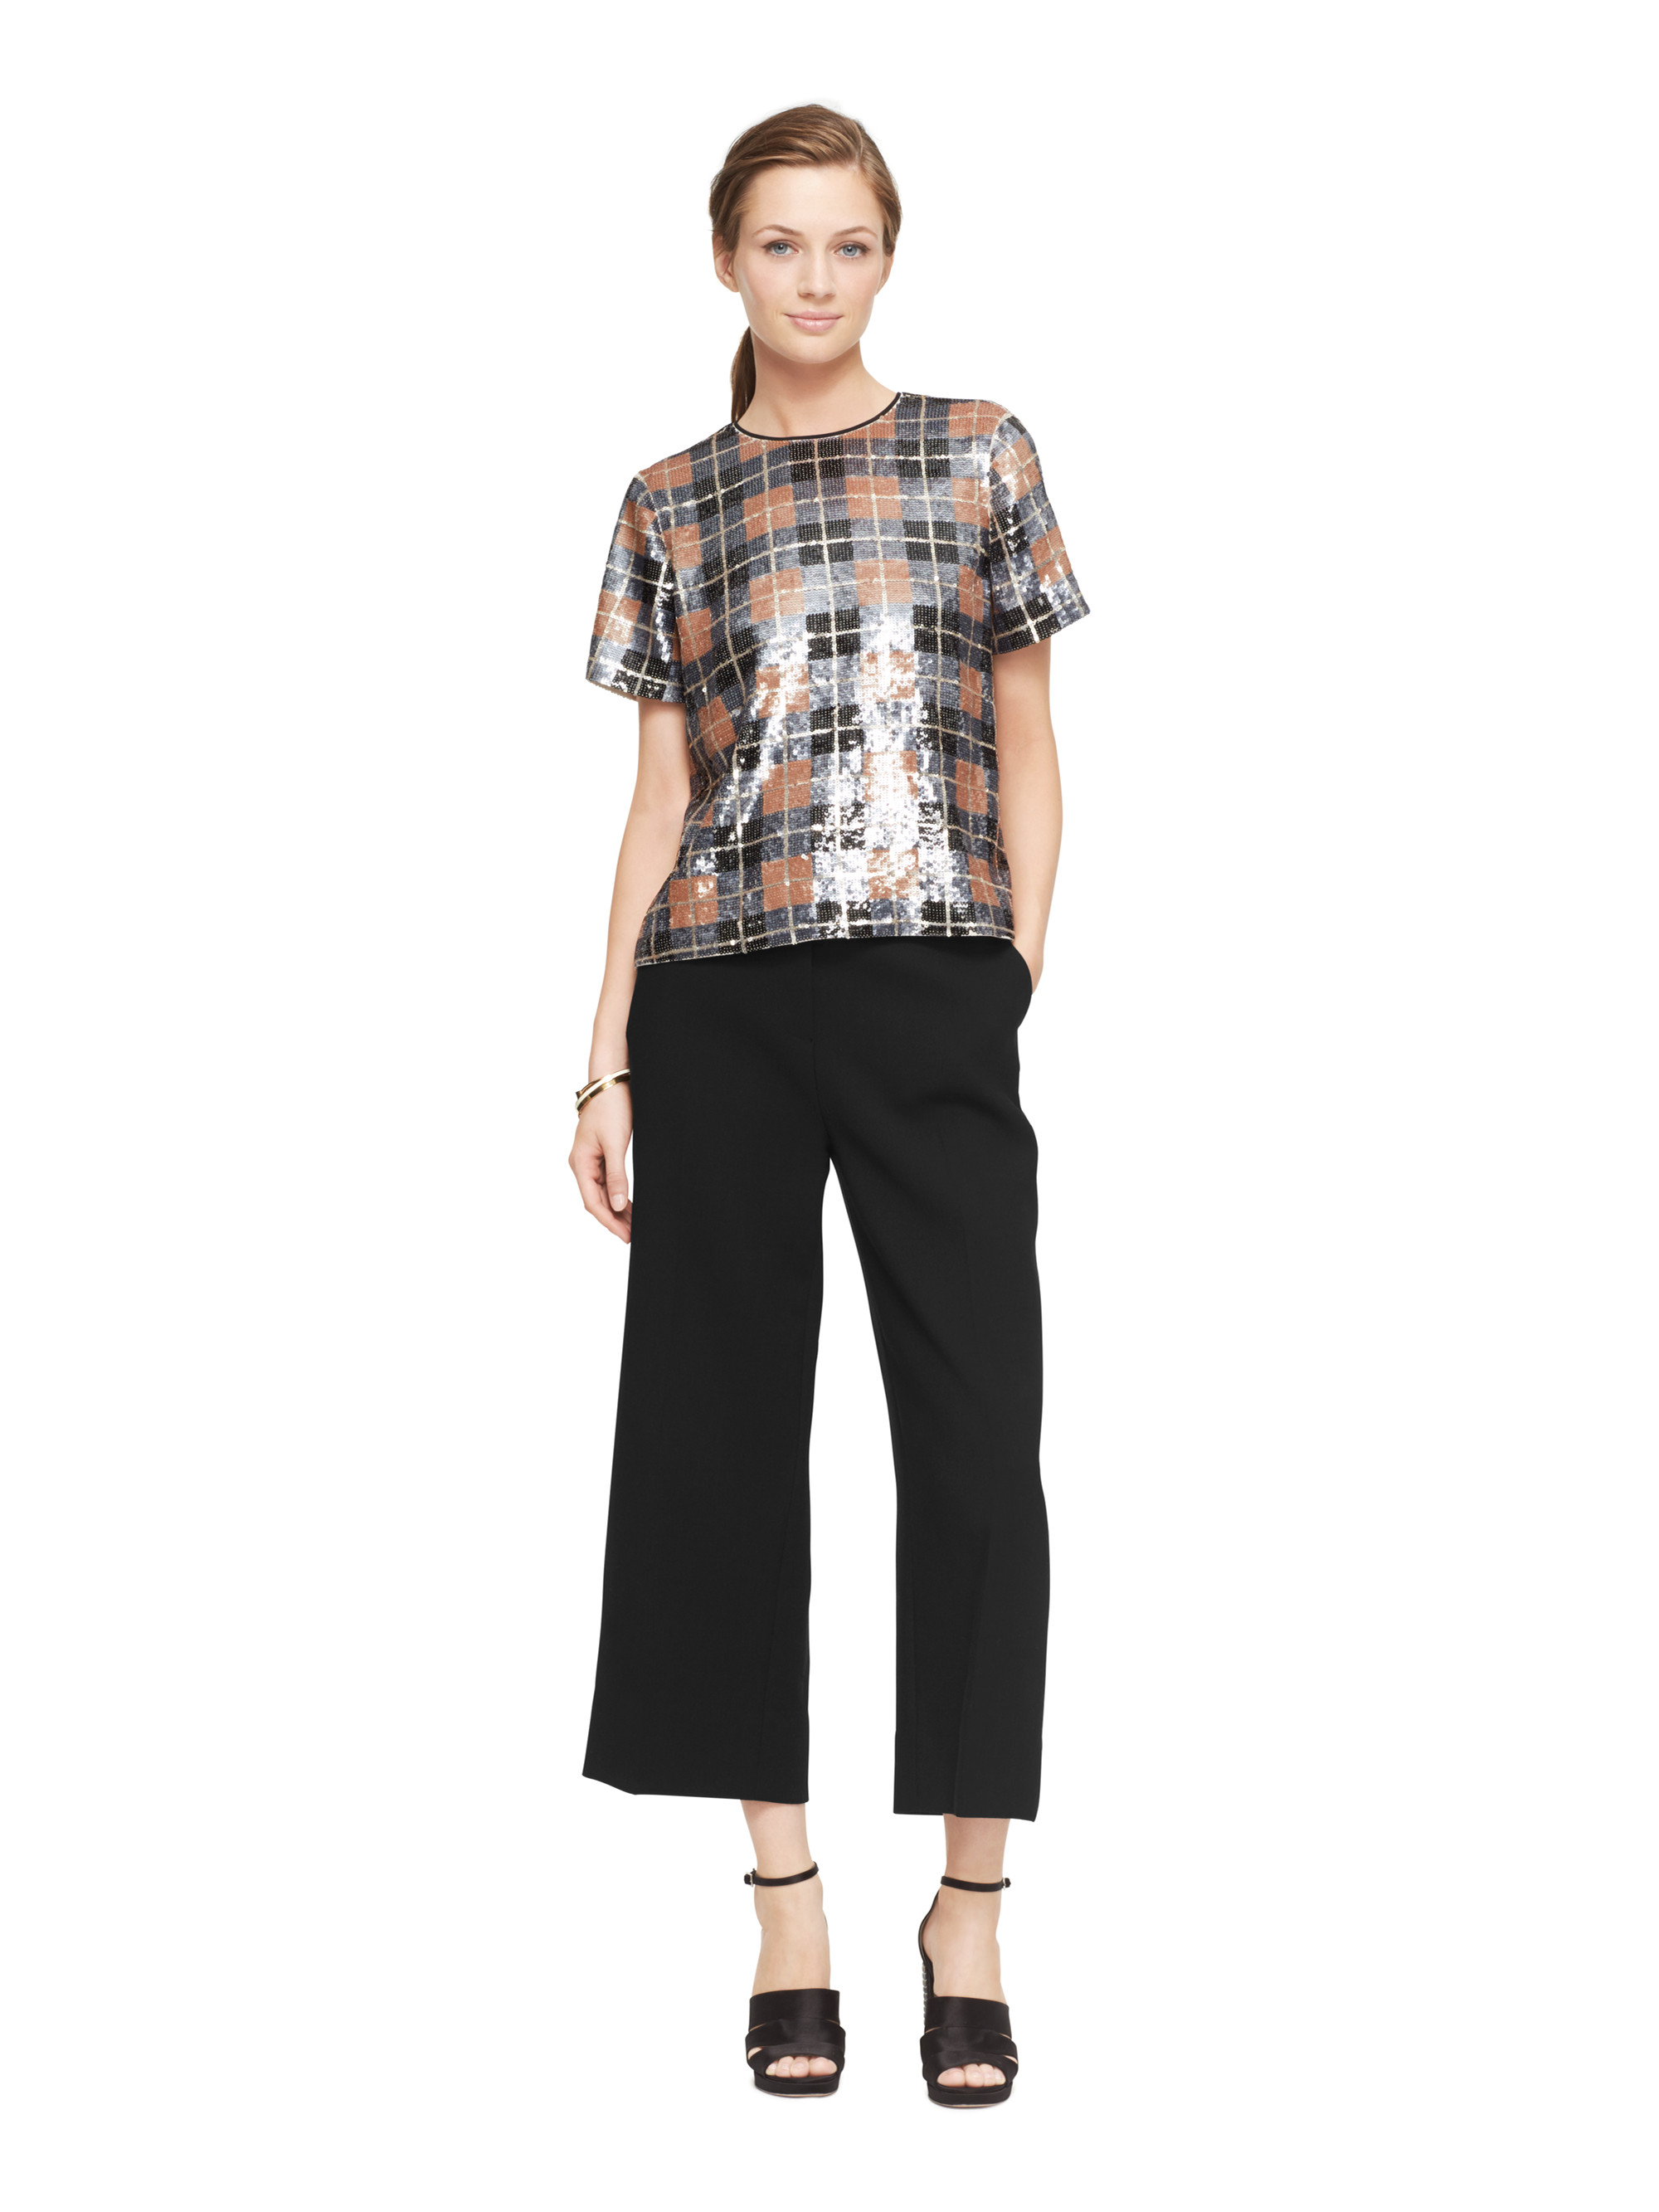 Lyst - Kate Spade New York Sequin Plaid Top